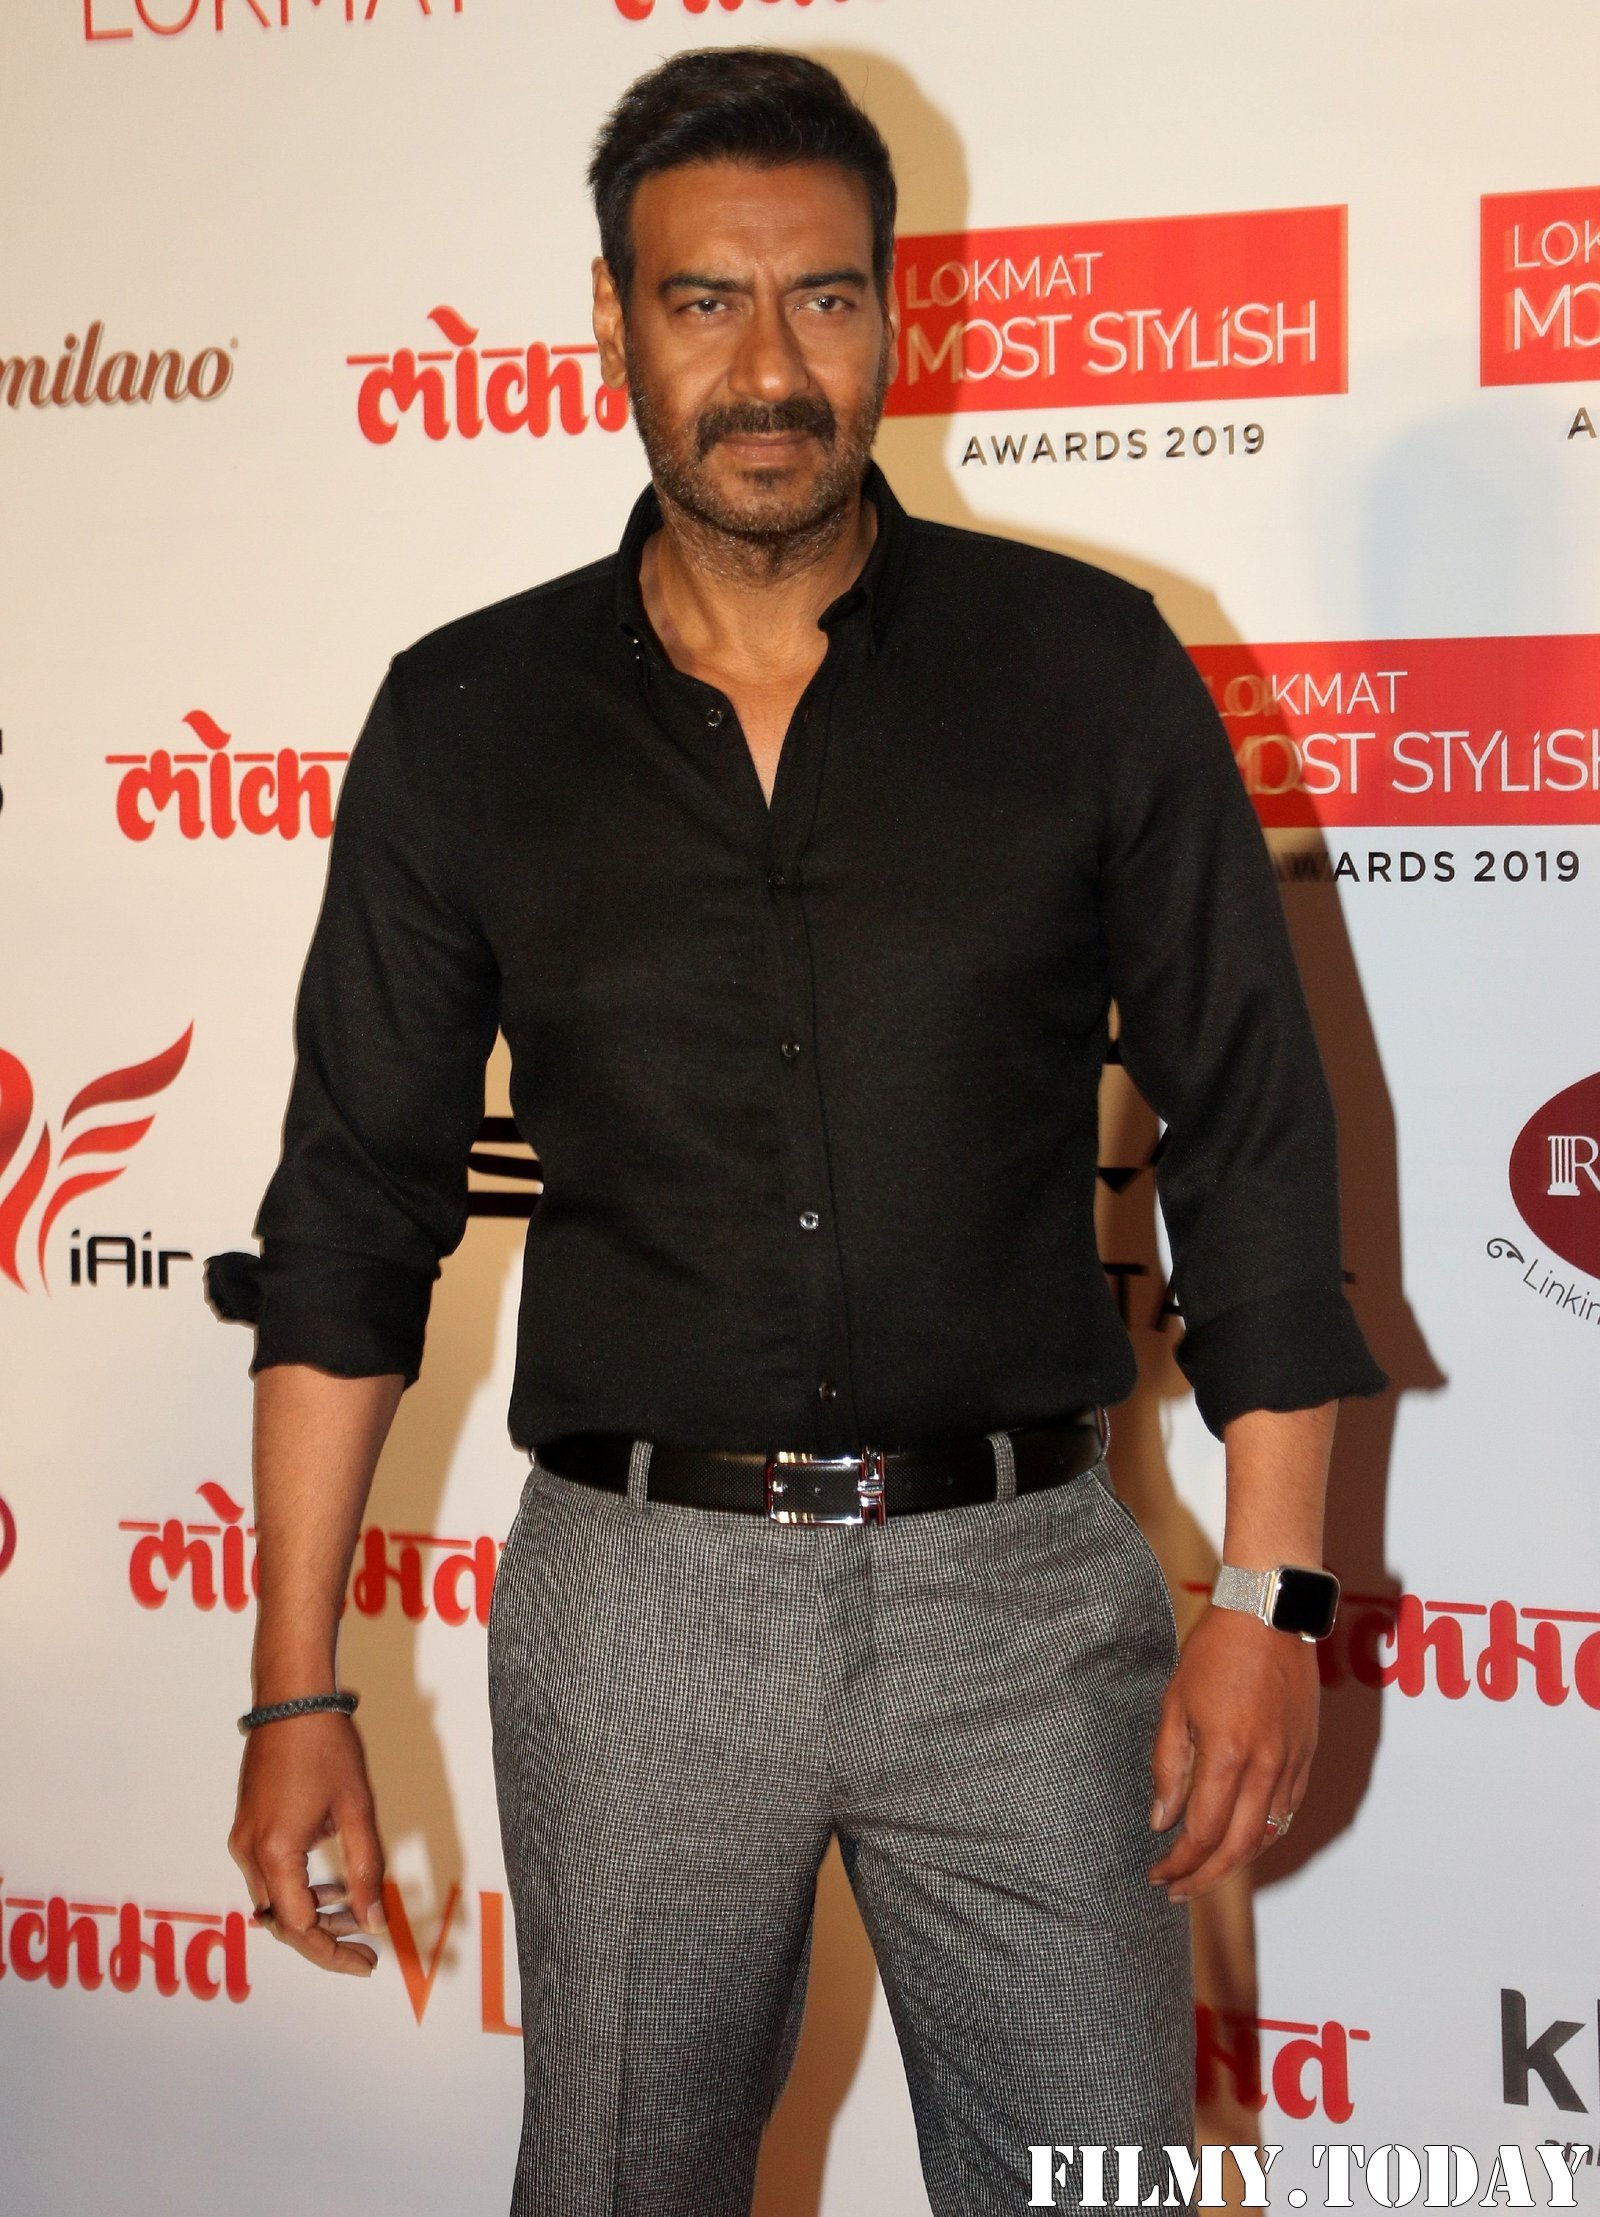 Ajay Devgn - Photos: Lokmat Most Stylish Awards 2019 At The Leela Hotel | Picture 1709607